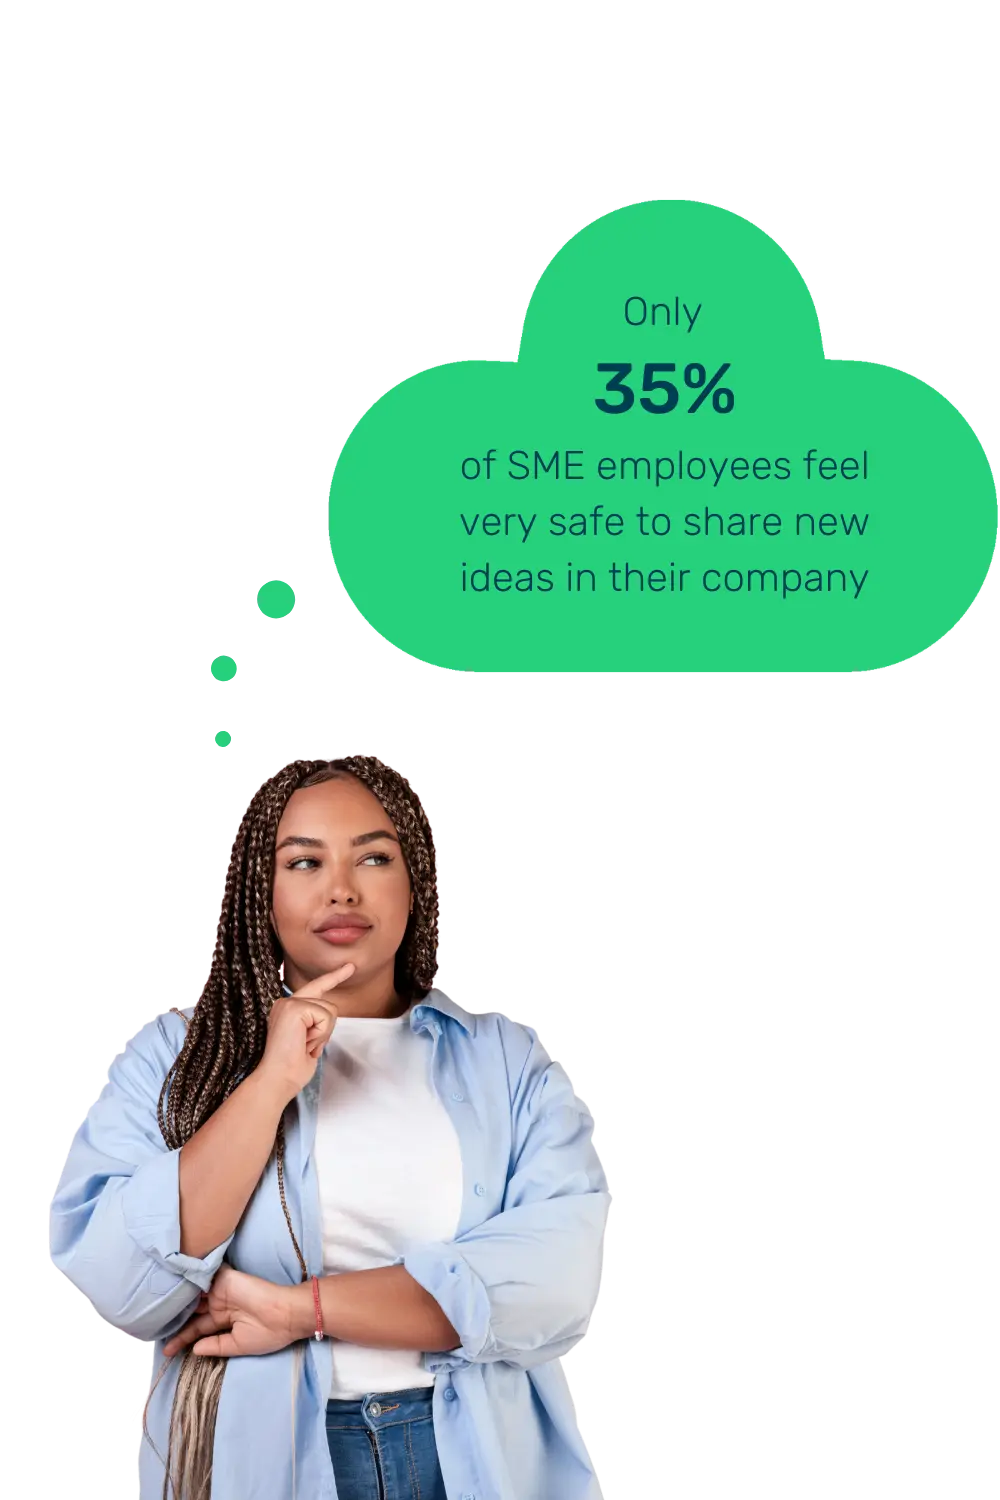 Lady with braids in a smart blue shirt looking thoughtful as a green cloud floats above her containing a stat about SME employees